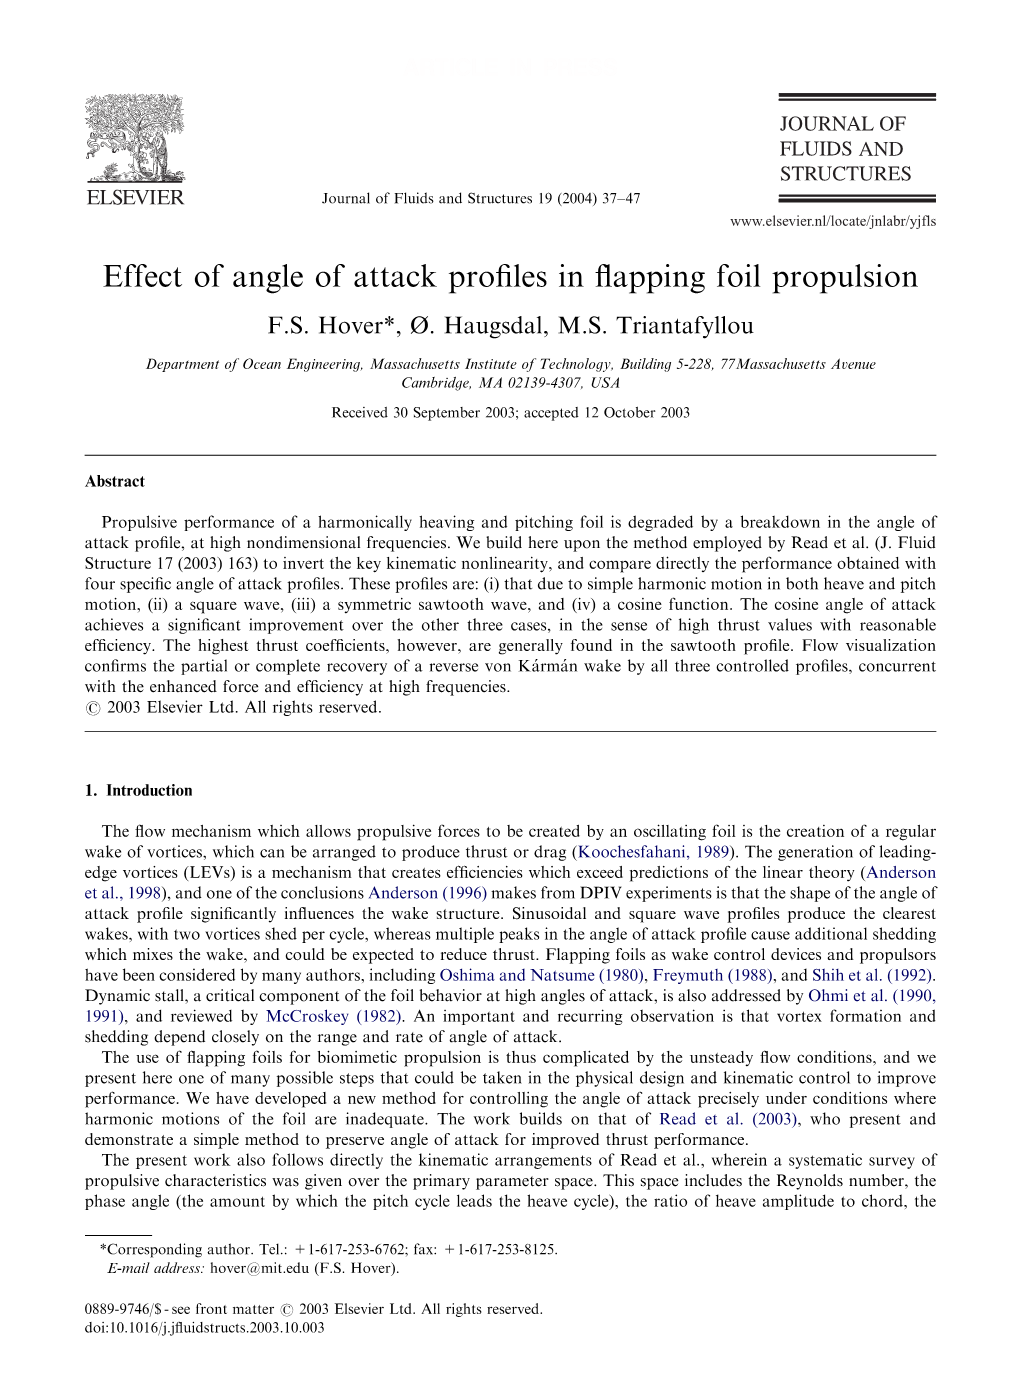 Effect of Angle of Attack Profiles in Flapping Foil Propulsion